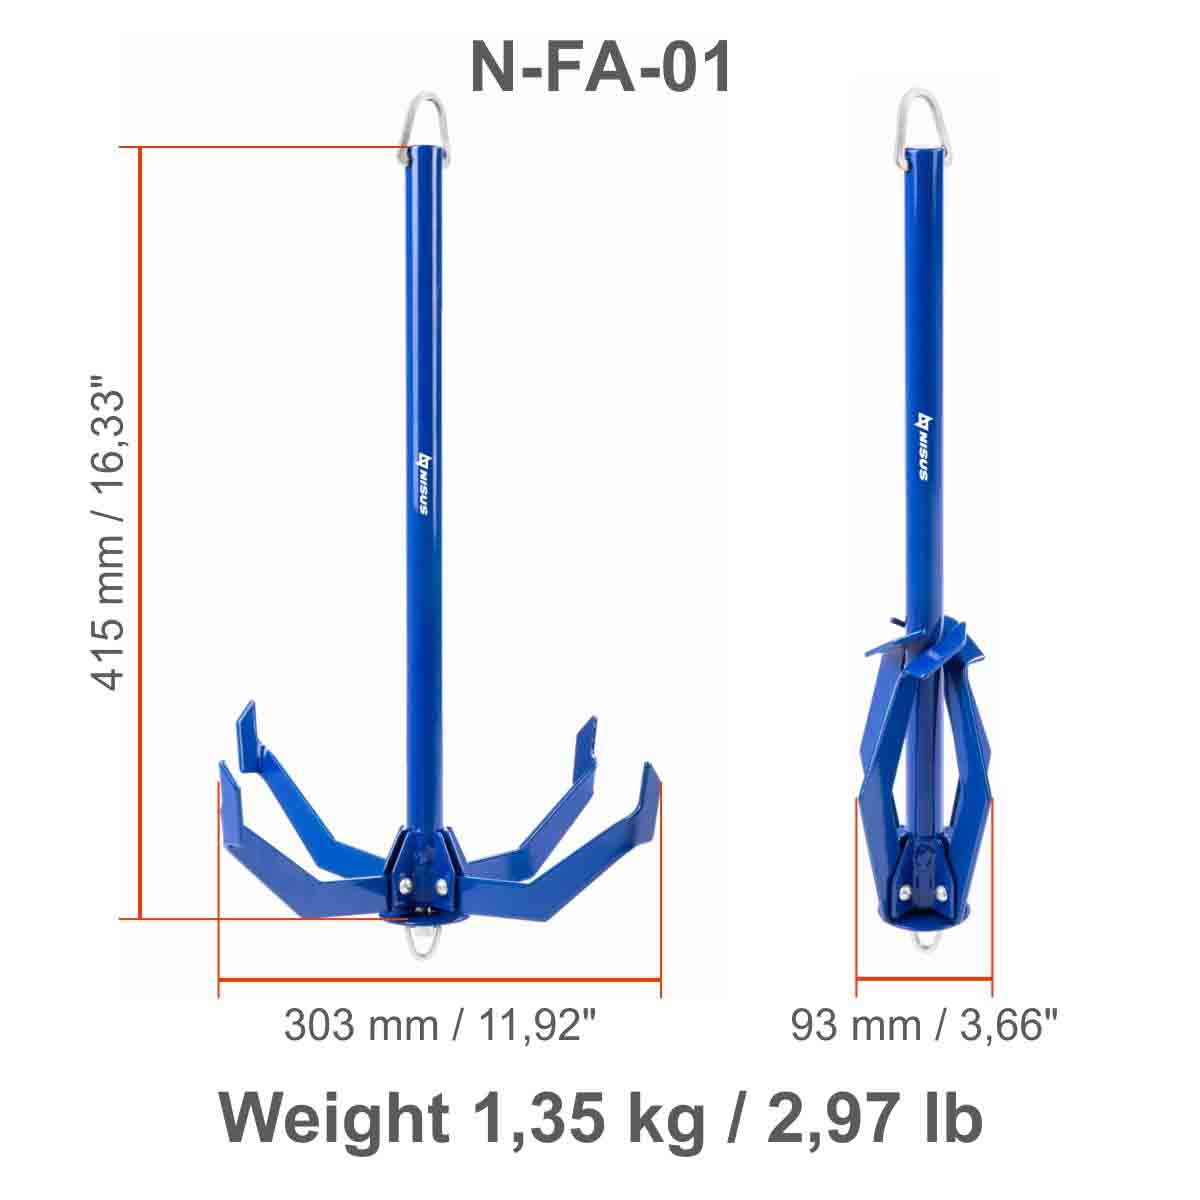 3 lbs Grapnel Portable Folding Anchor is 16.3 inches long, 11.9 inches wide when unfolded and 3.7 inches wide when folded